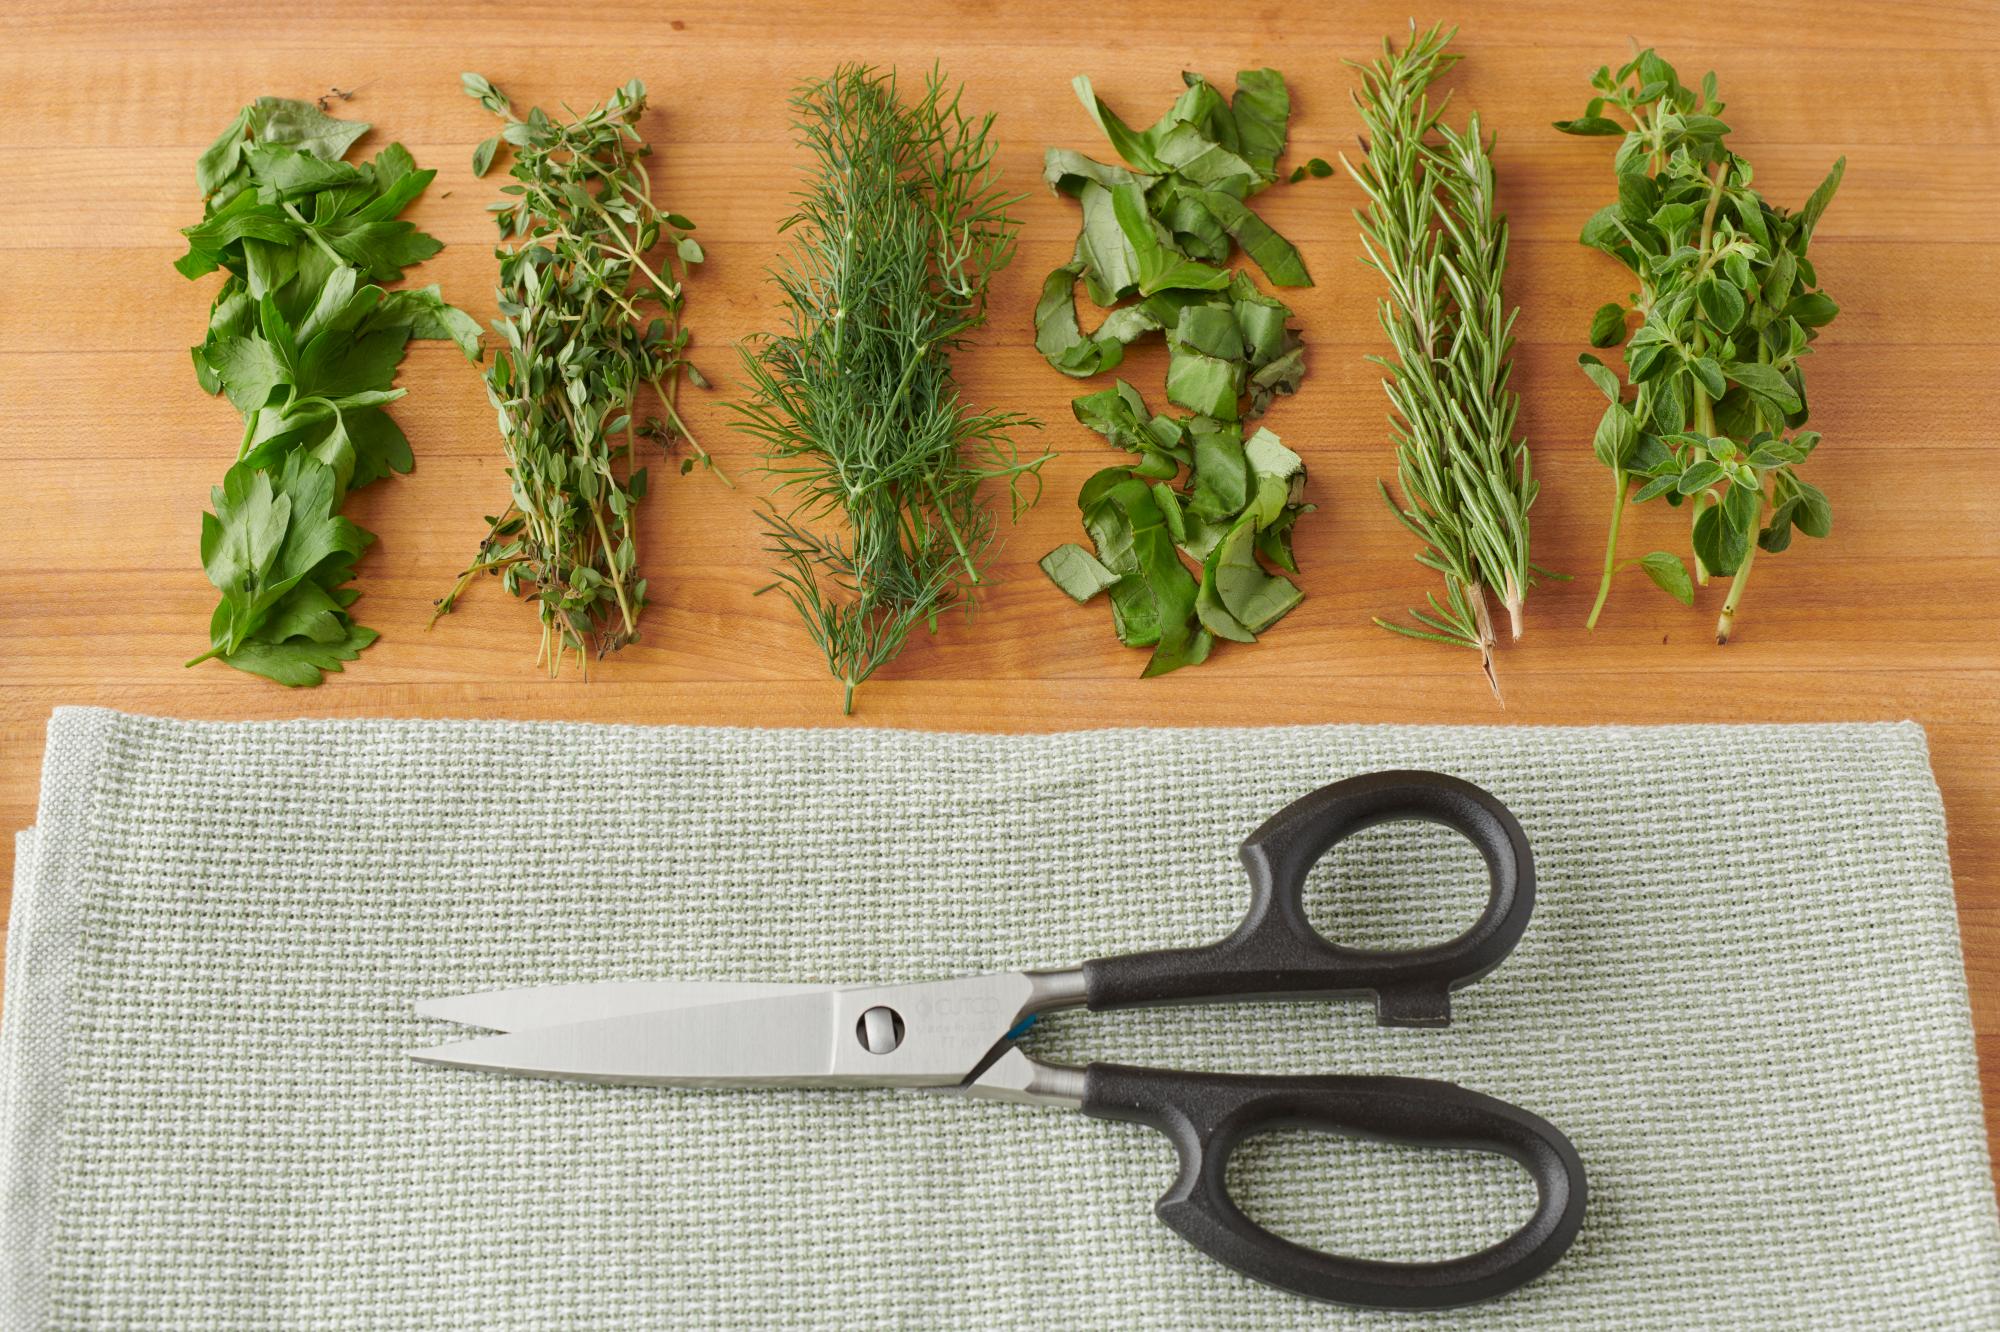 Super Shears with snipped herbs.